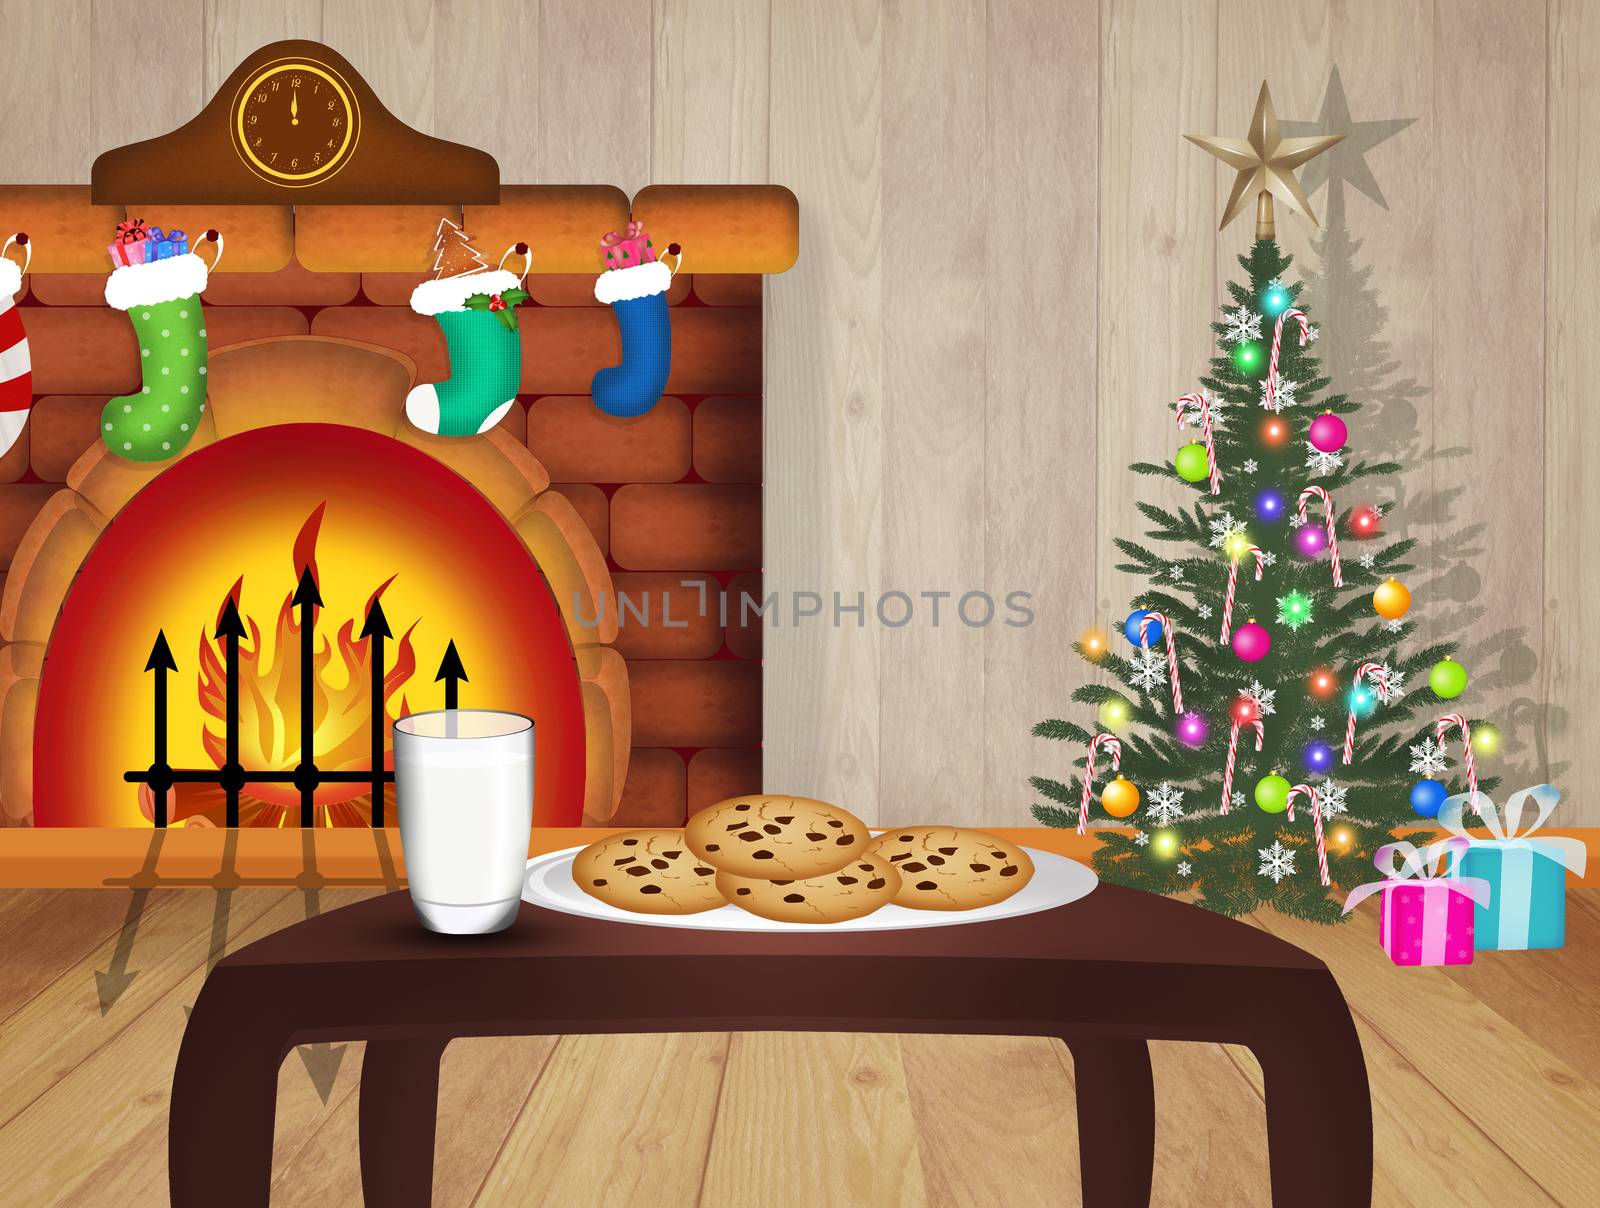 illustration of surprise for Santa Claus with milk and biscuits